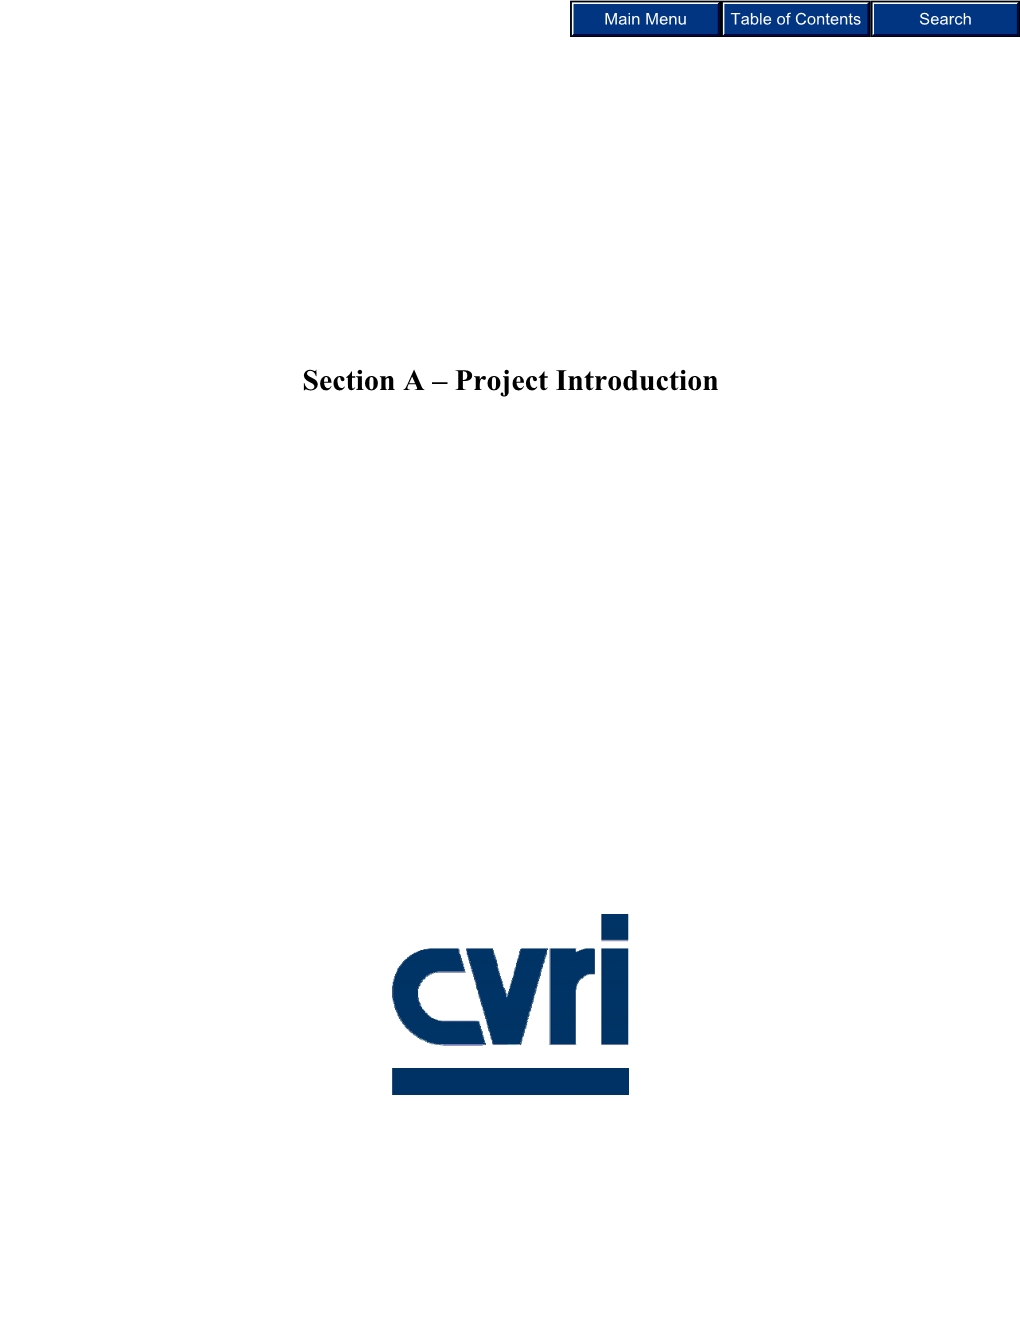 Section a – Project Introduction